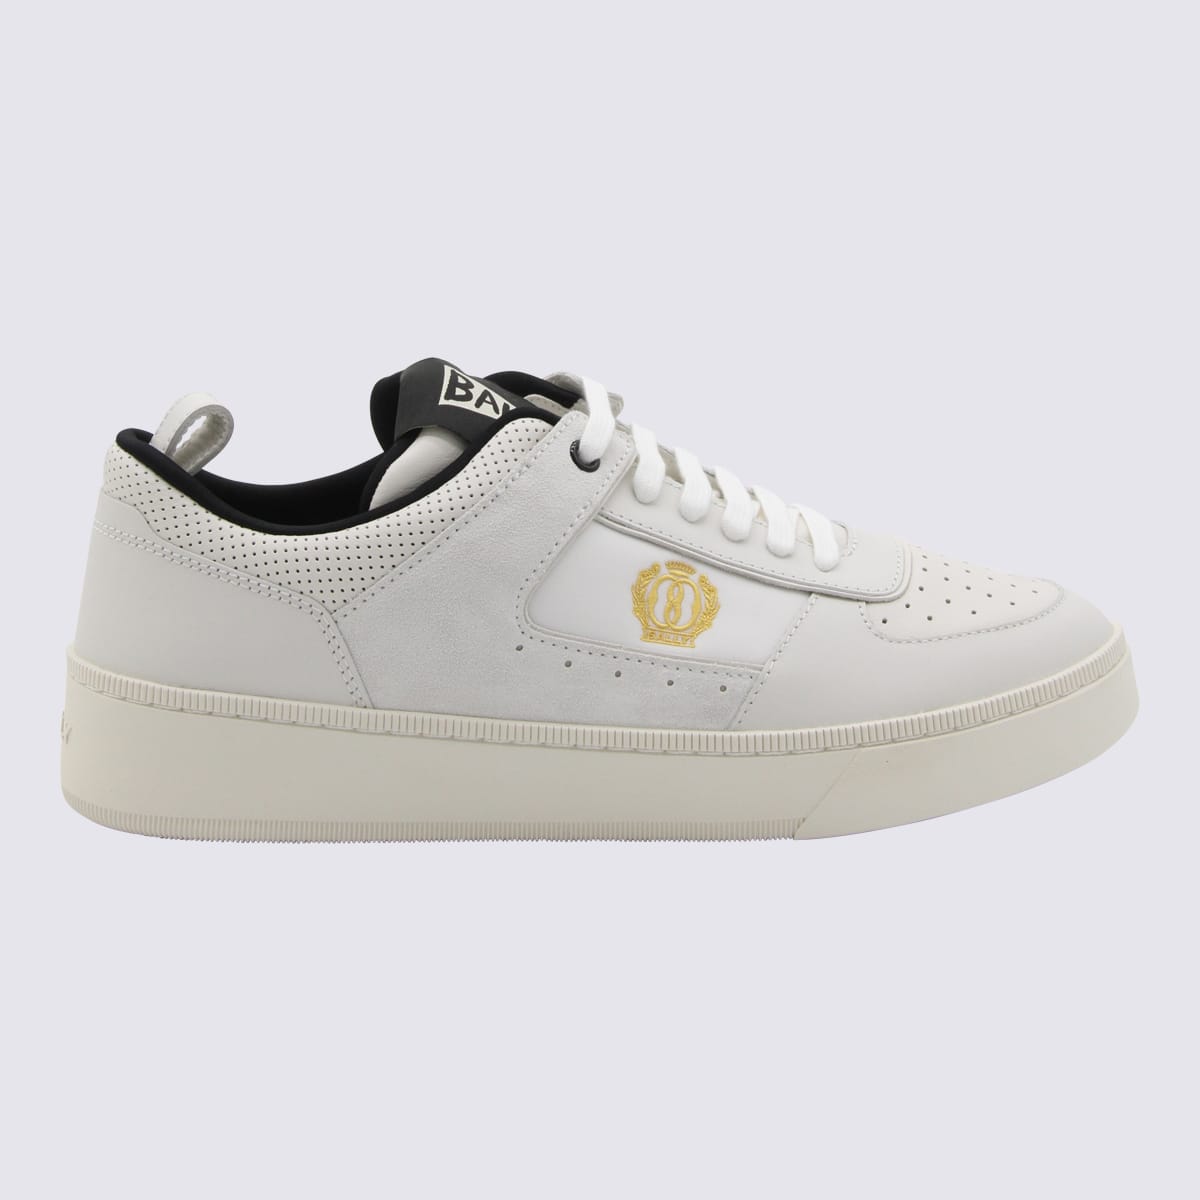 Bally White And Black Leather Raise Sneakers